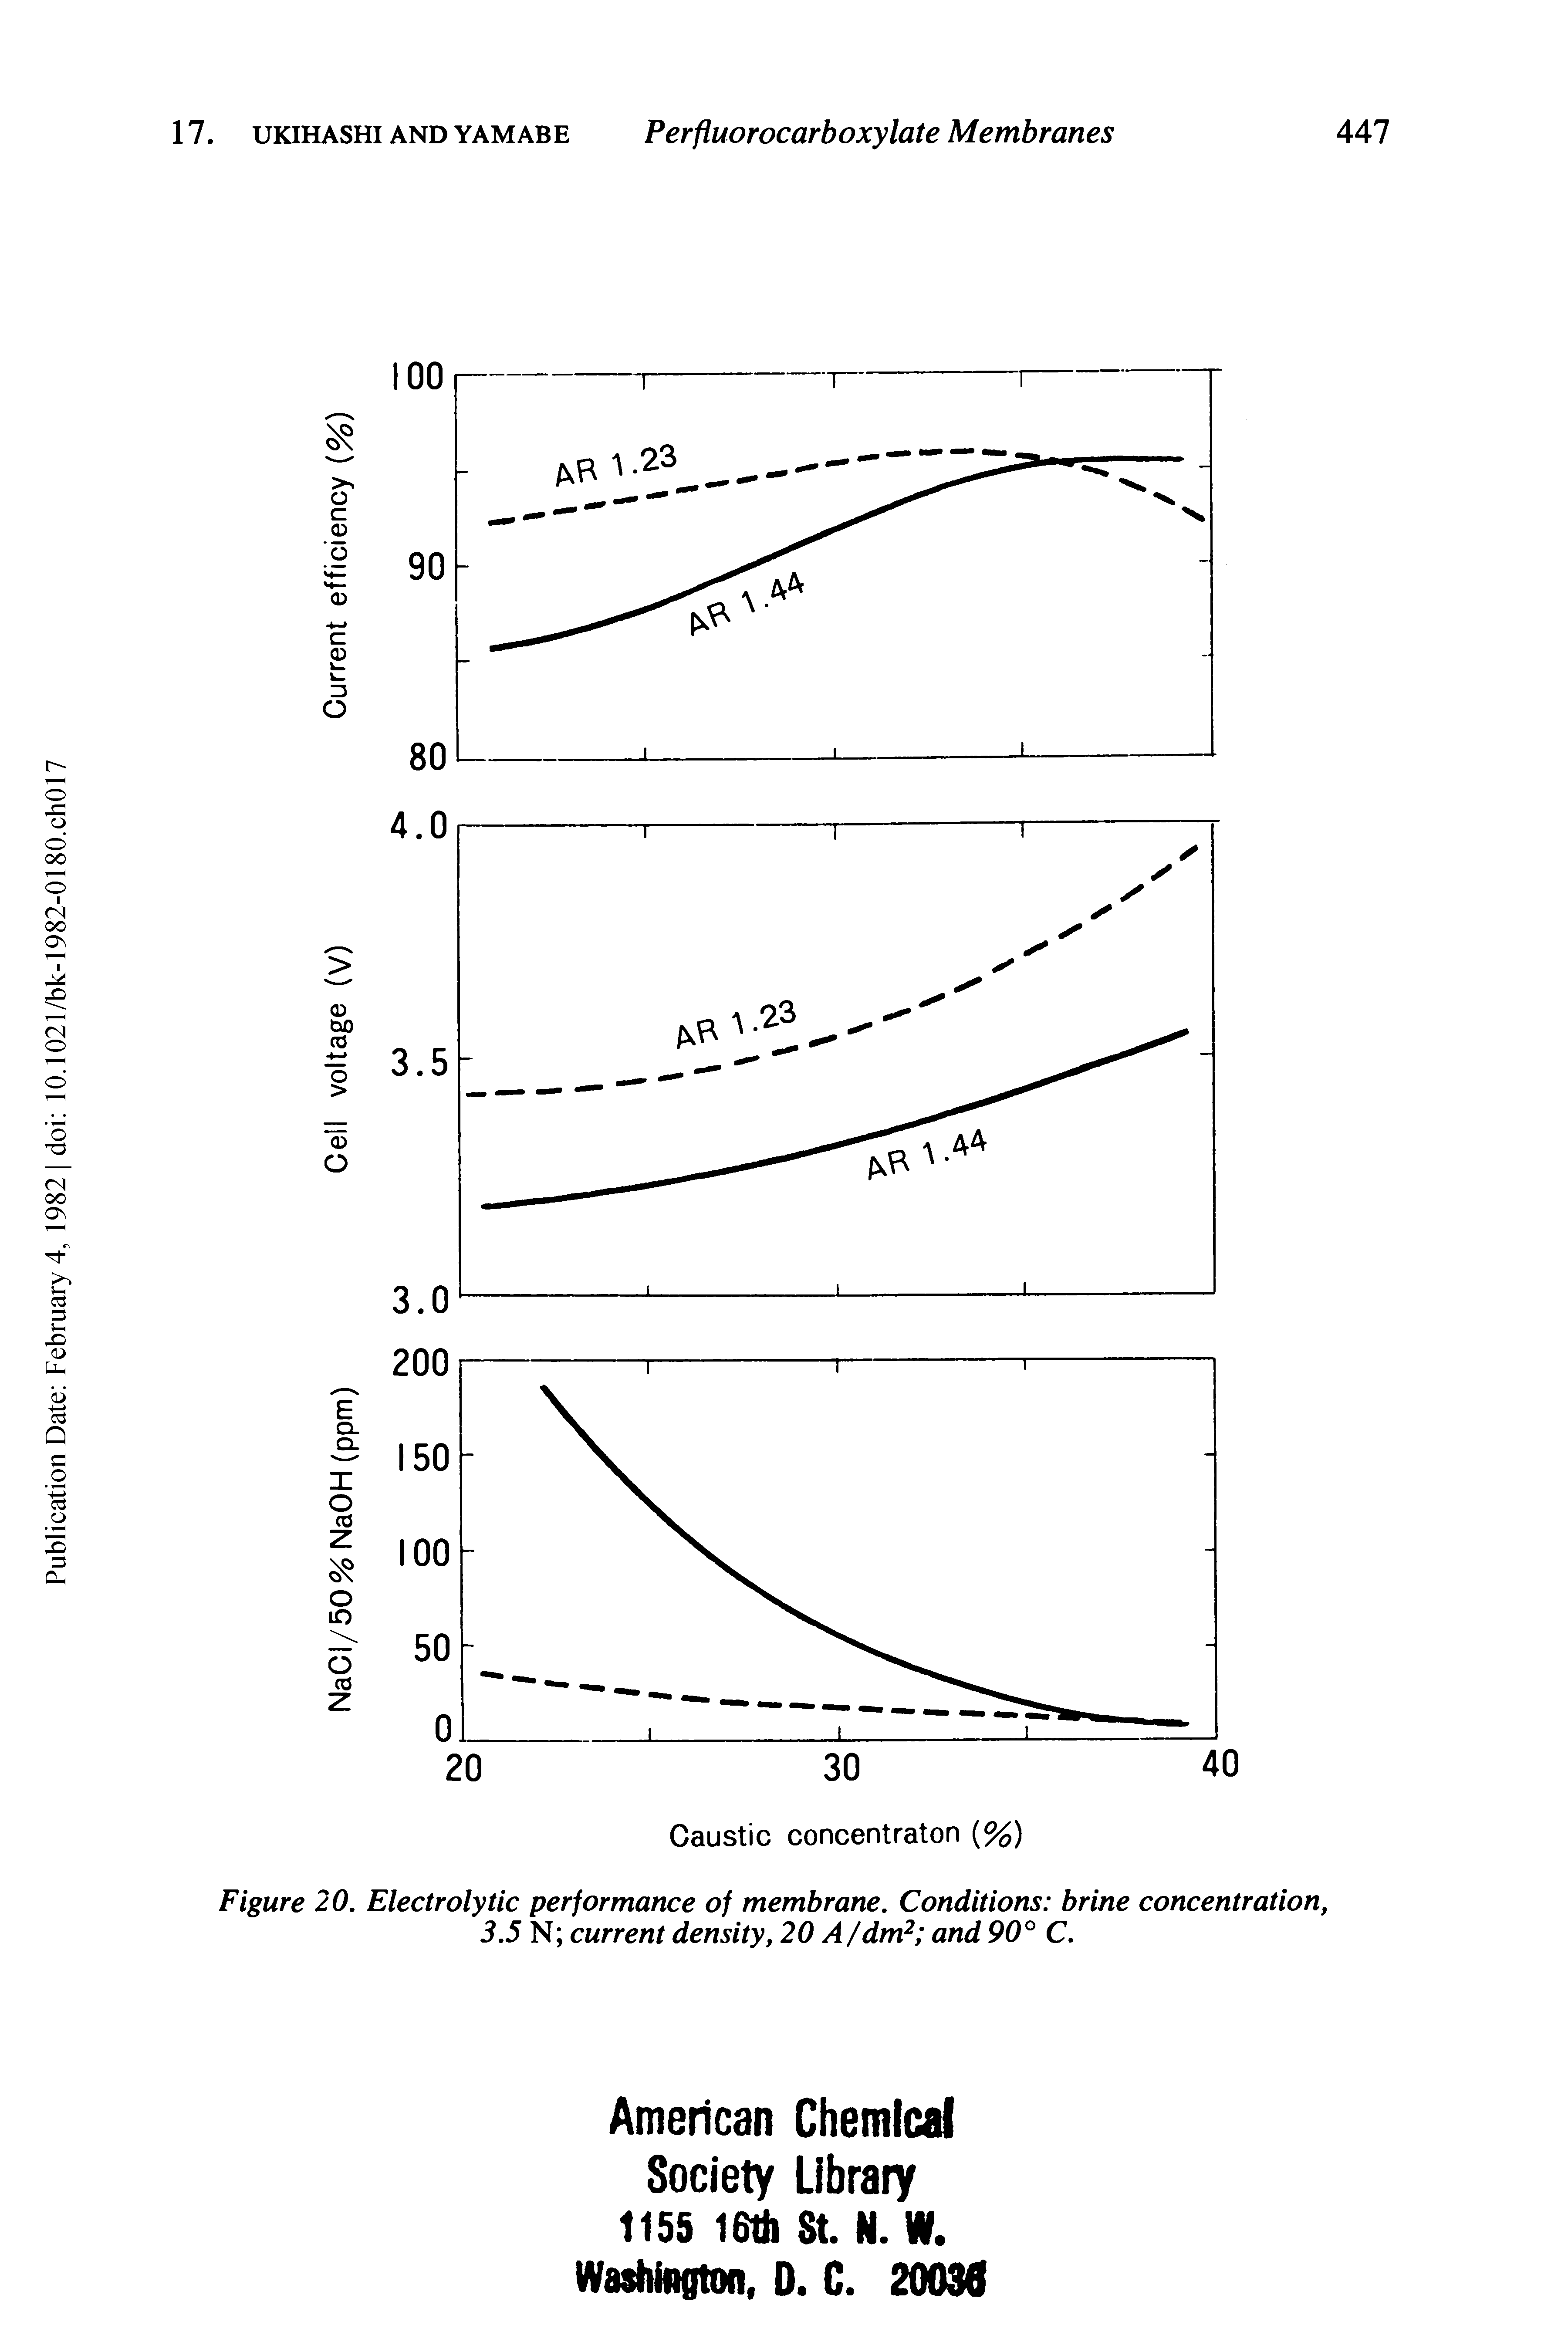 Figure 20. Electrolytic performance of membrane. Conditions brine concentration, 3.5 N current density, 20 A/dm2 and 90° C.